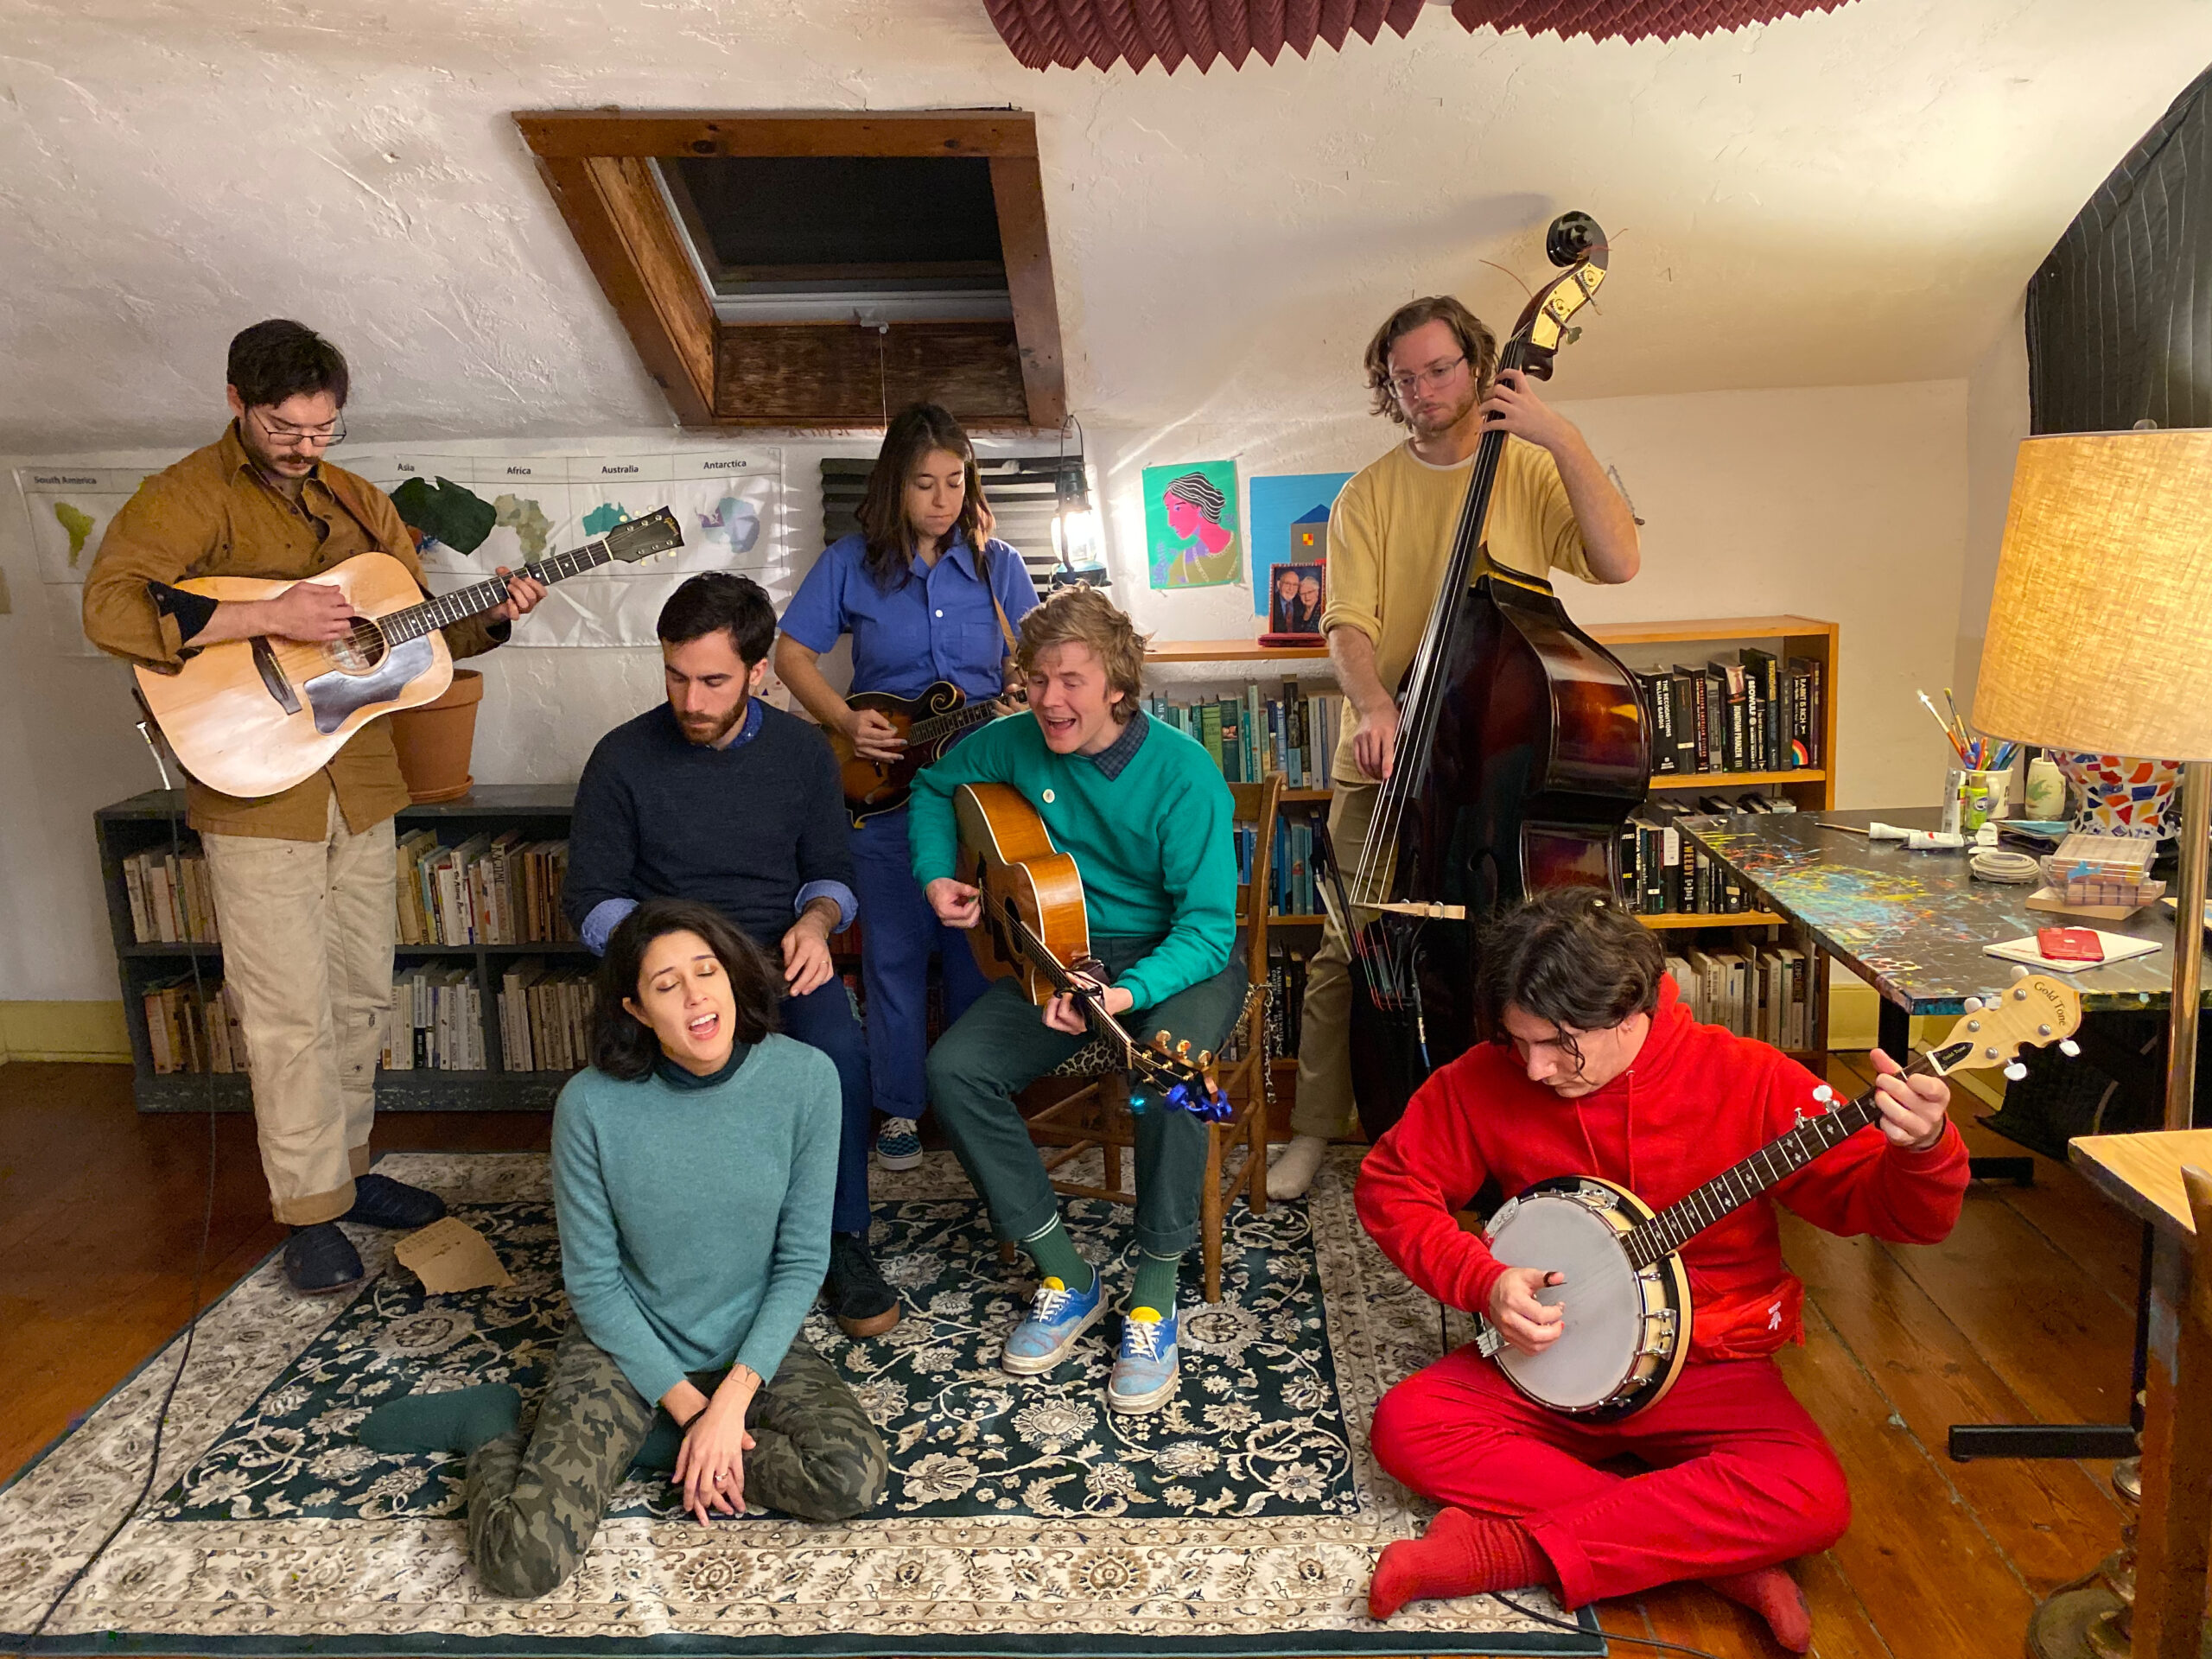 PINEGROVE – Streaming-Tickets